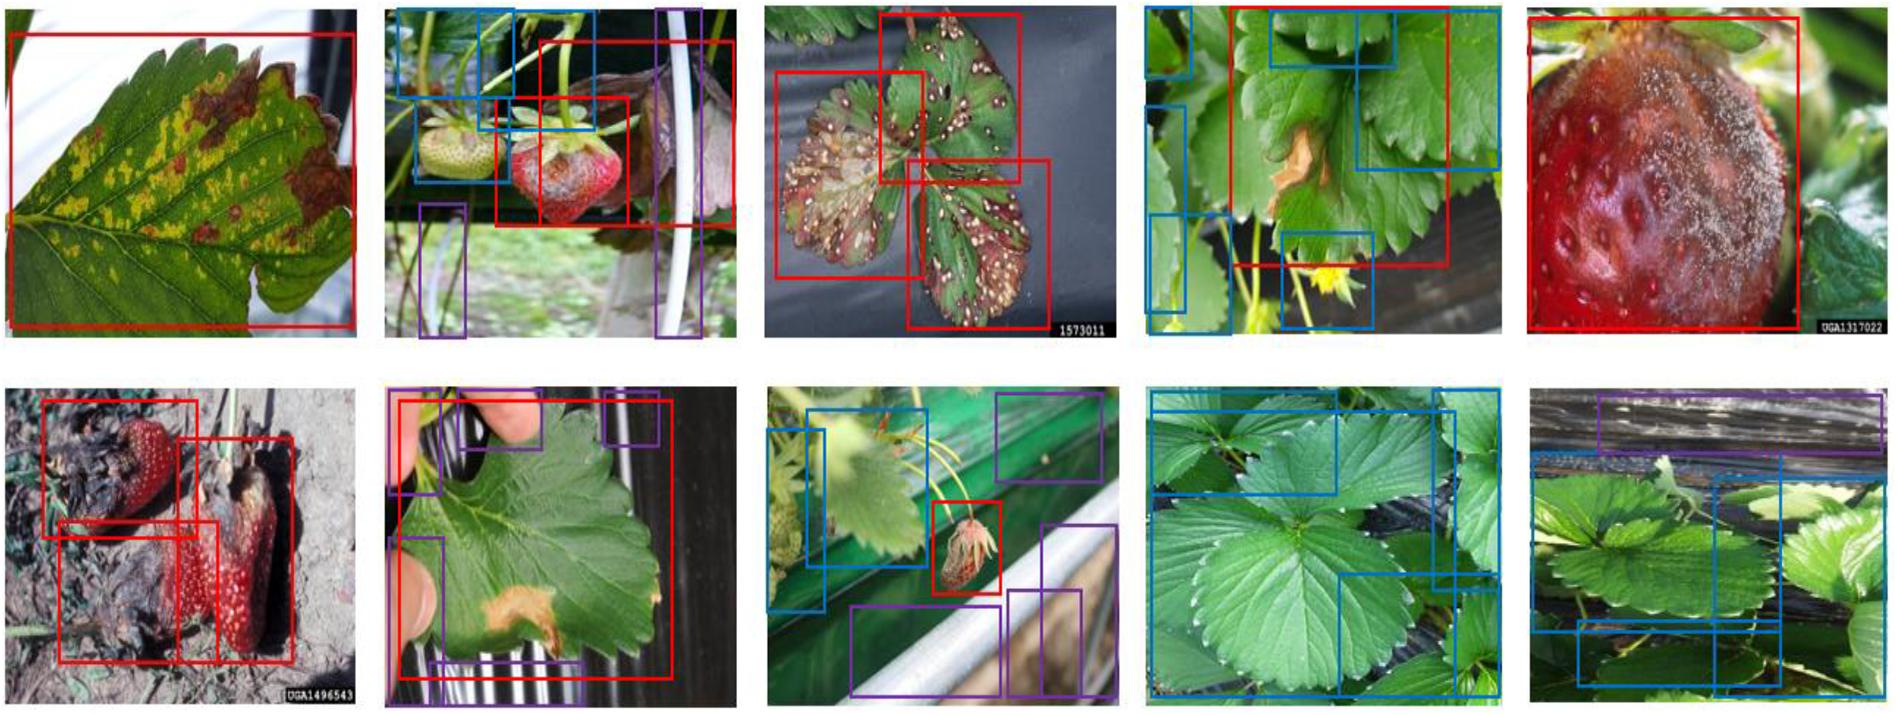 Frontiers | Improved Vision-Based Detection of Strawberry Diseases ...